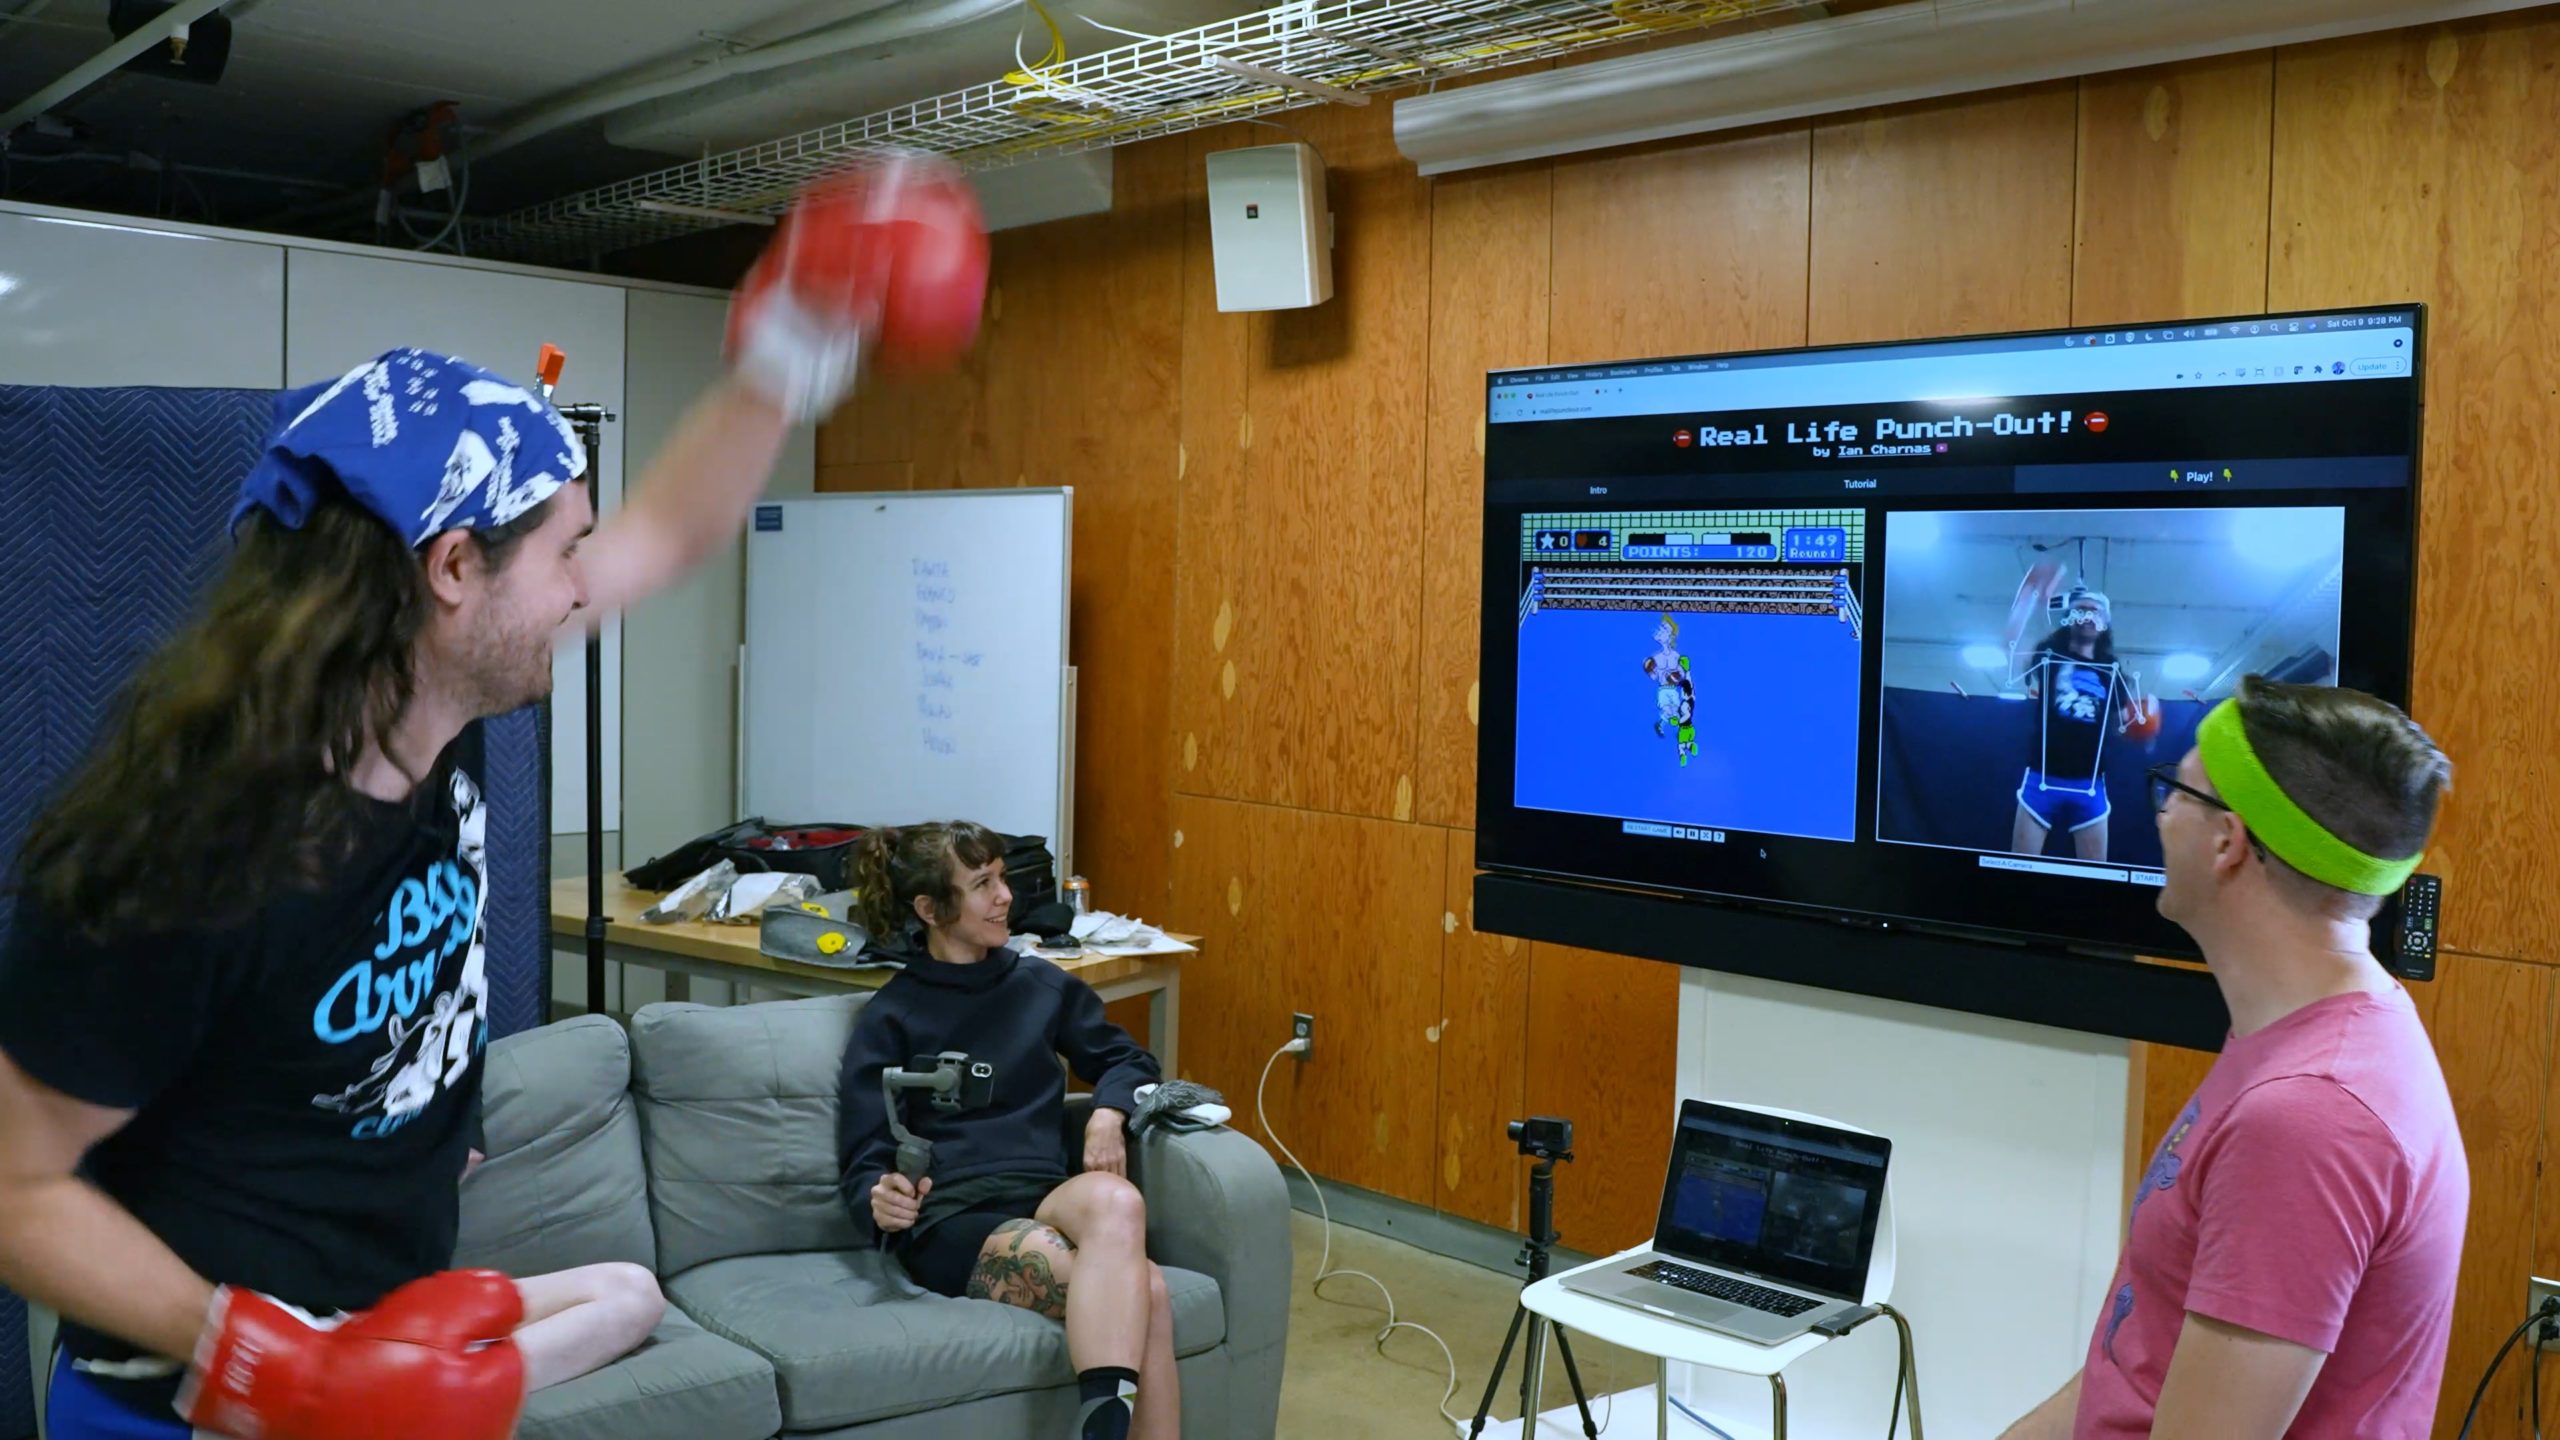 Hacking Nintendo Punch-Out To Control It With Actual Punches